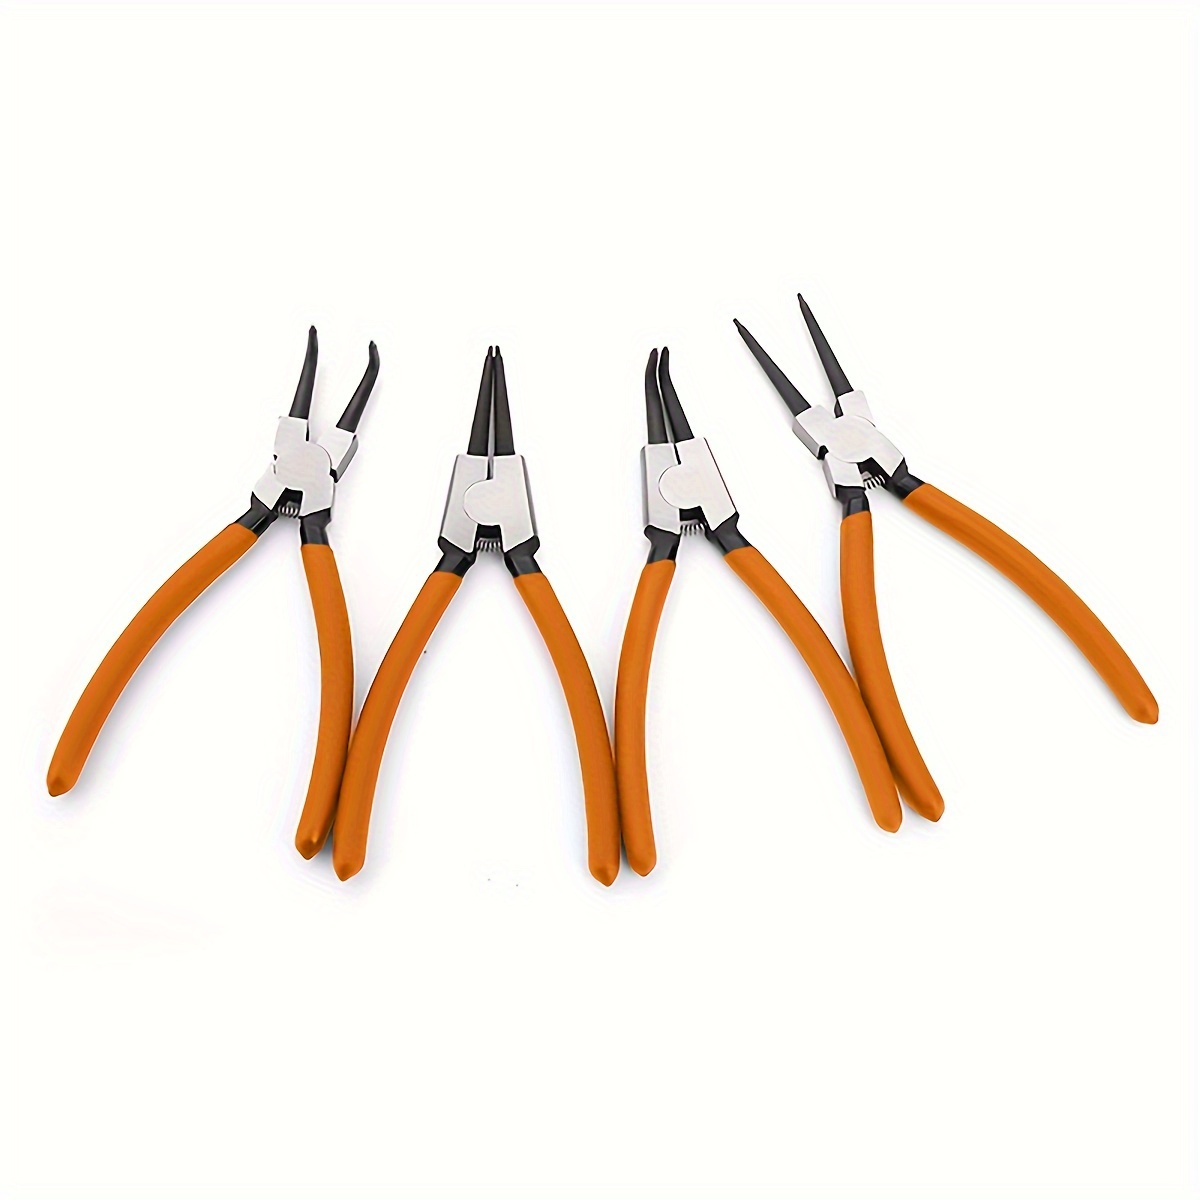 7-inch Professional Snap Ring Pliers Set